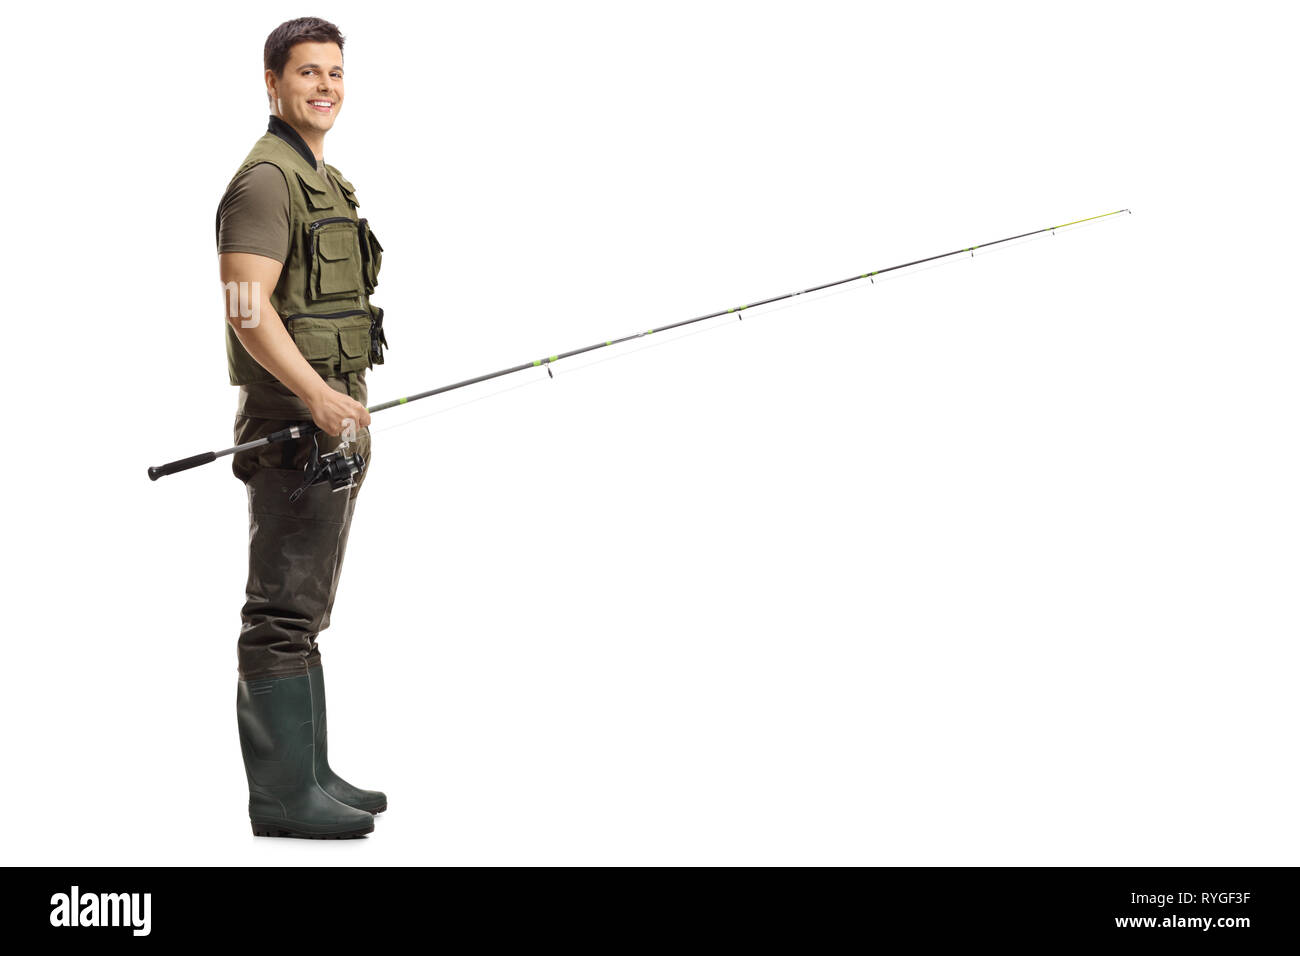 Fishing camera Cut Out Stock Images & Pictures - Alamy